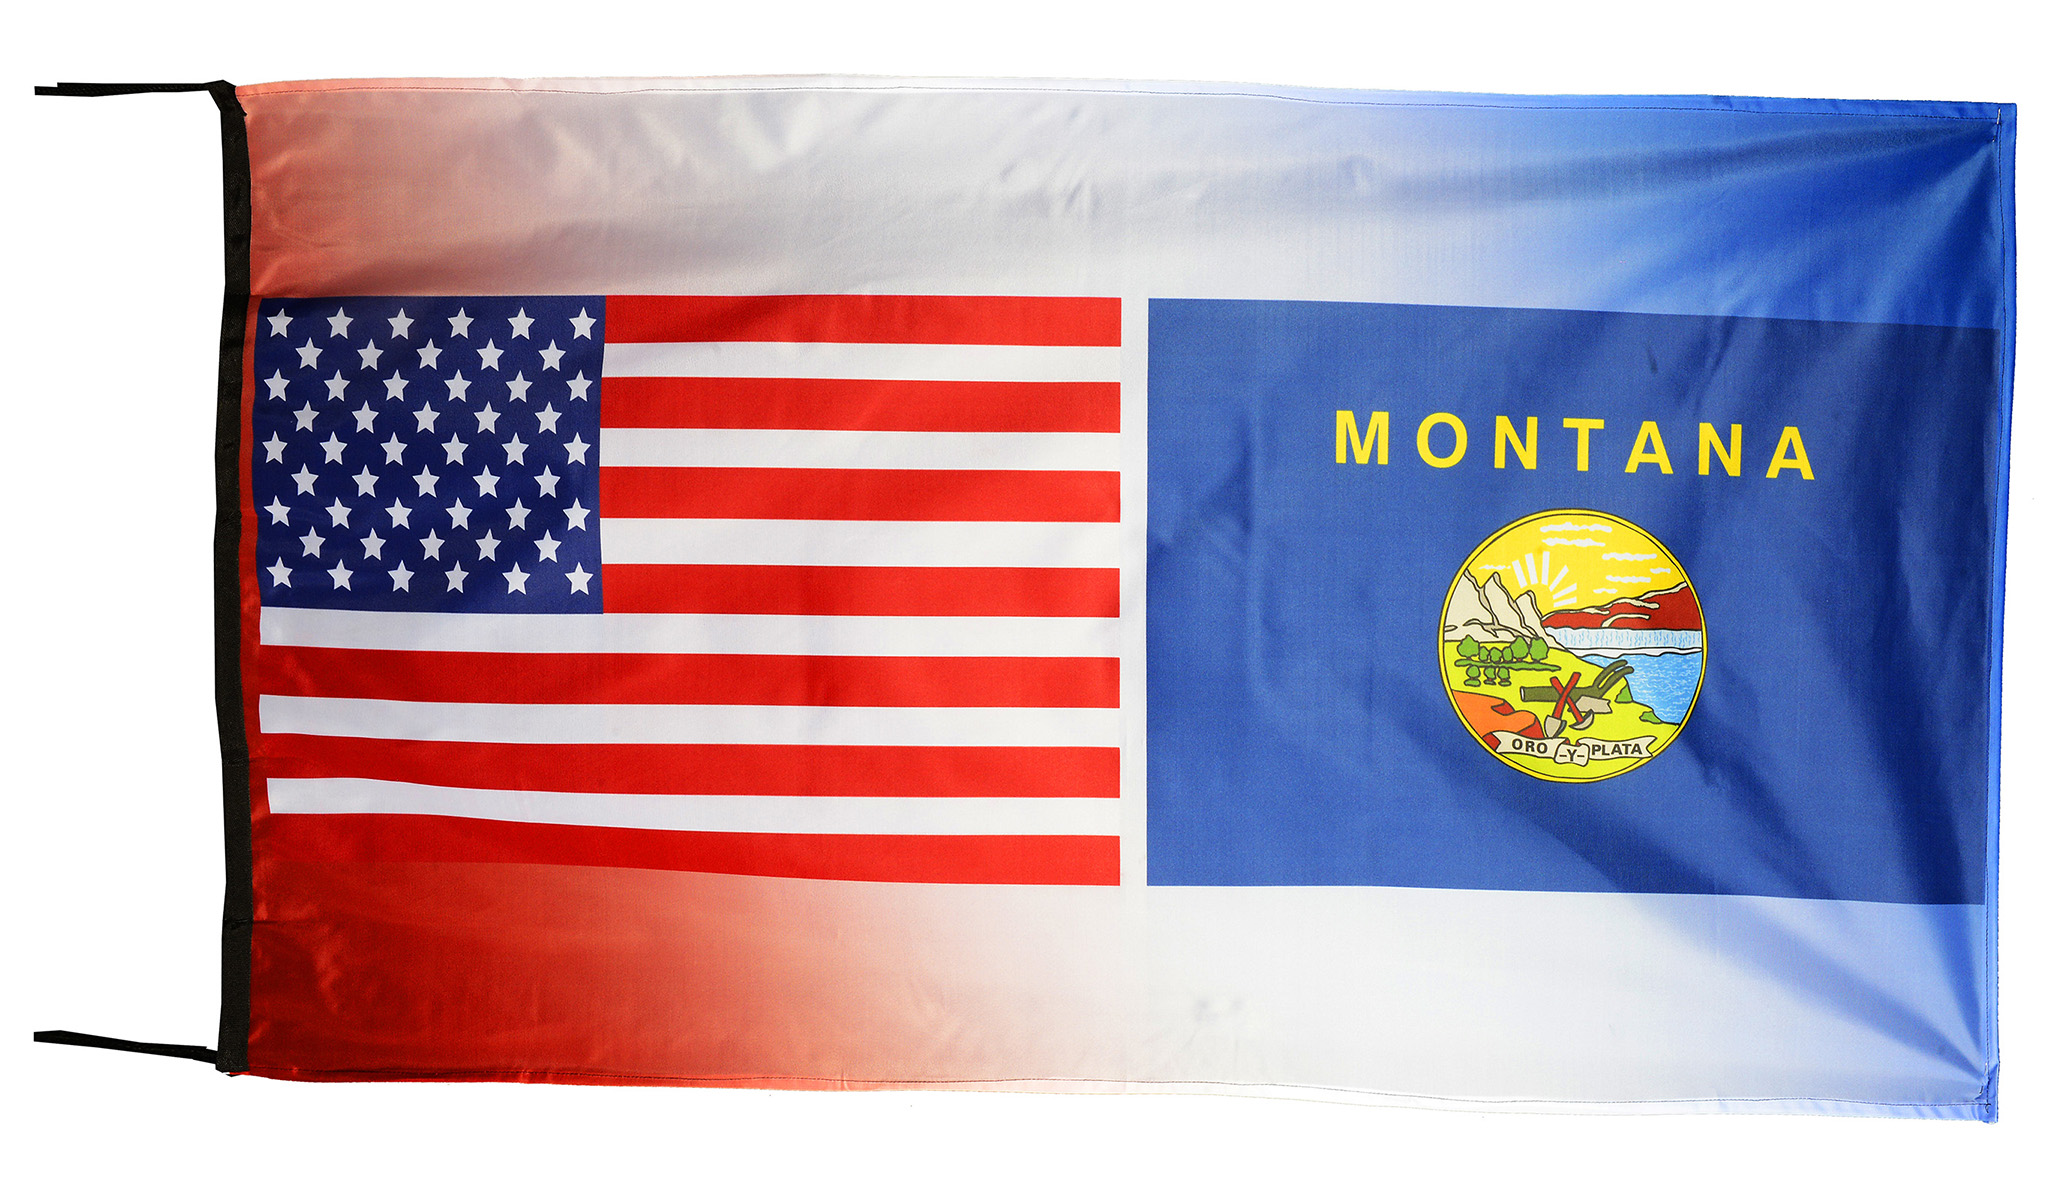 Flag  093 USA / US Country / United States Of America and Montana State / Patriotic / Pride Hybrid Weather-Resistant Polyester Outdoor Flag Landscape Banner / Vivid Colors / 3 X 5 FT (150 x 90cm) International Flags for Sale